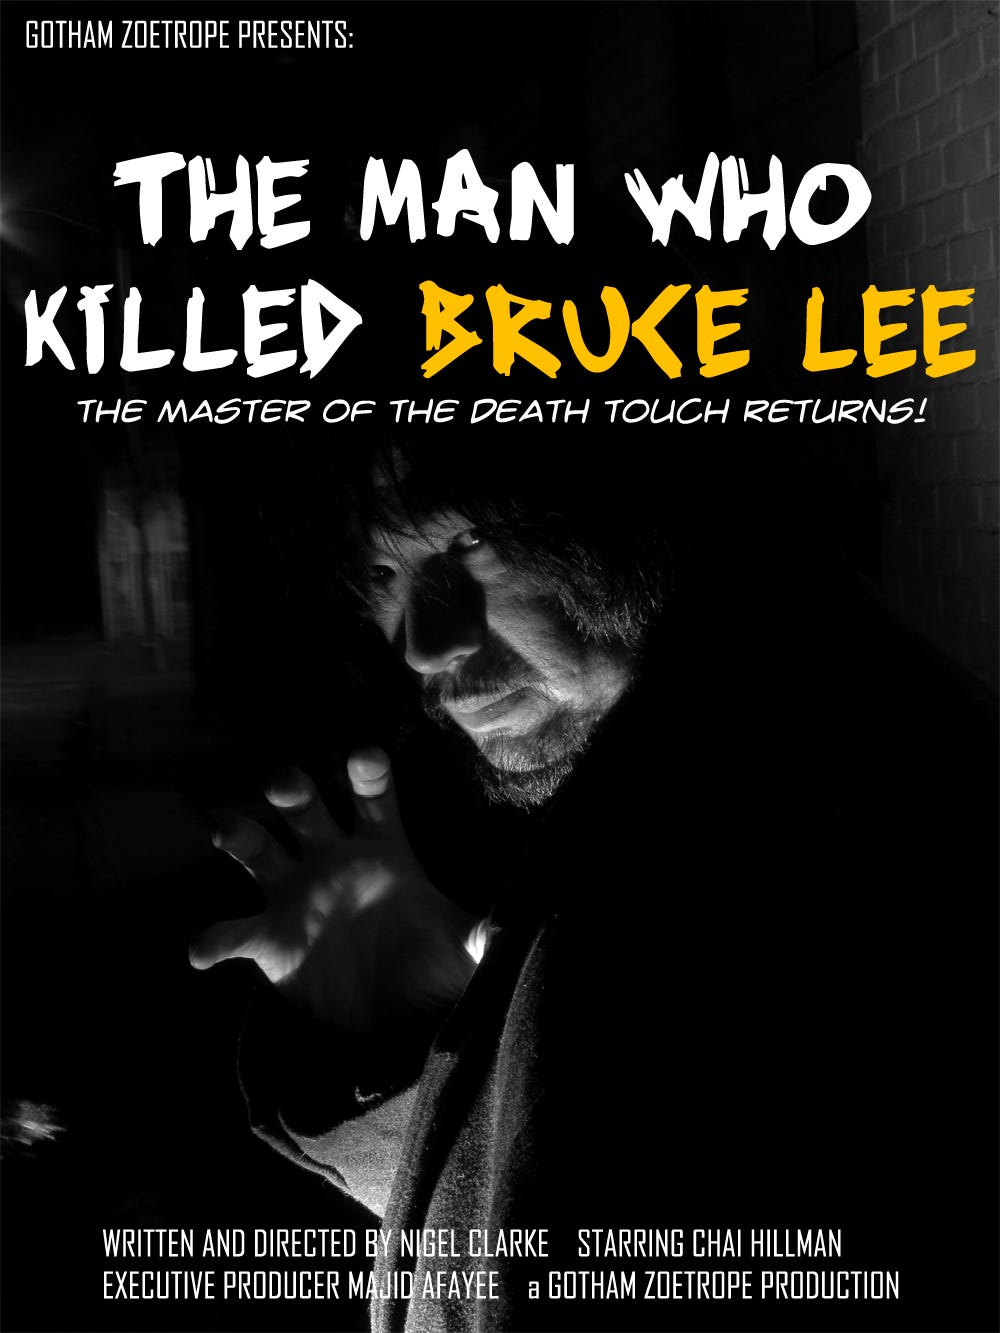 The Man Who Killed Bruce Lee. Was Bruce Lee killed by a nerve strike… | by  Illmatical | CATCHES BULLETS WITH HIS TEETH | Medium